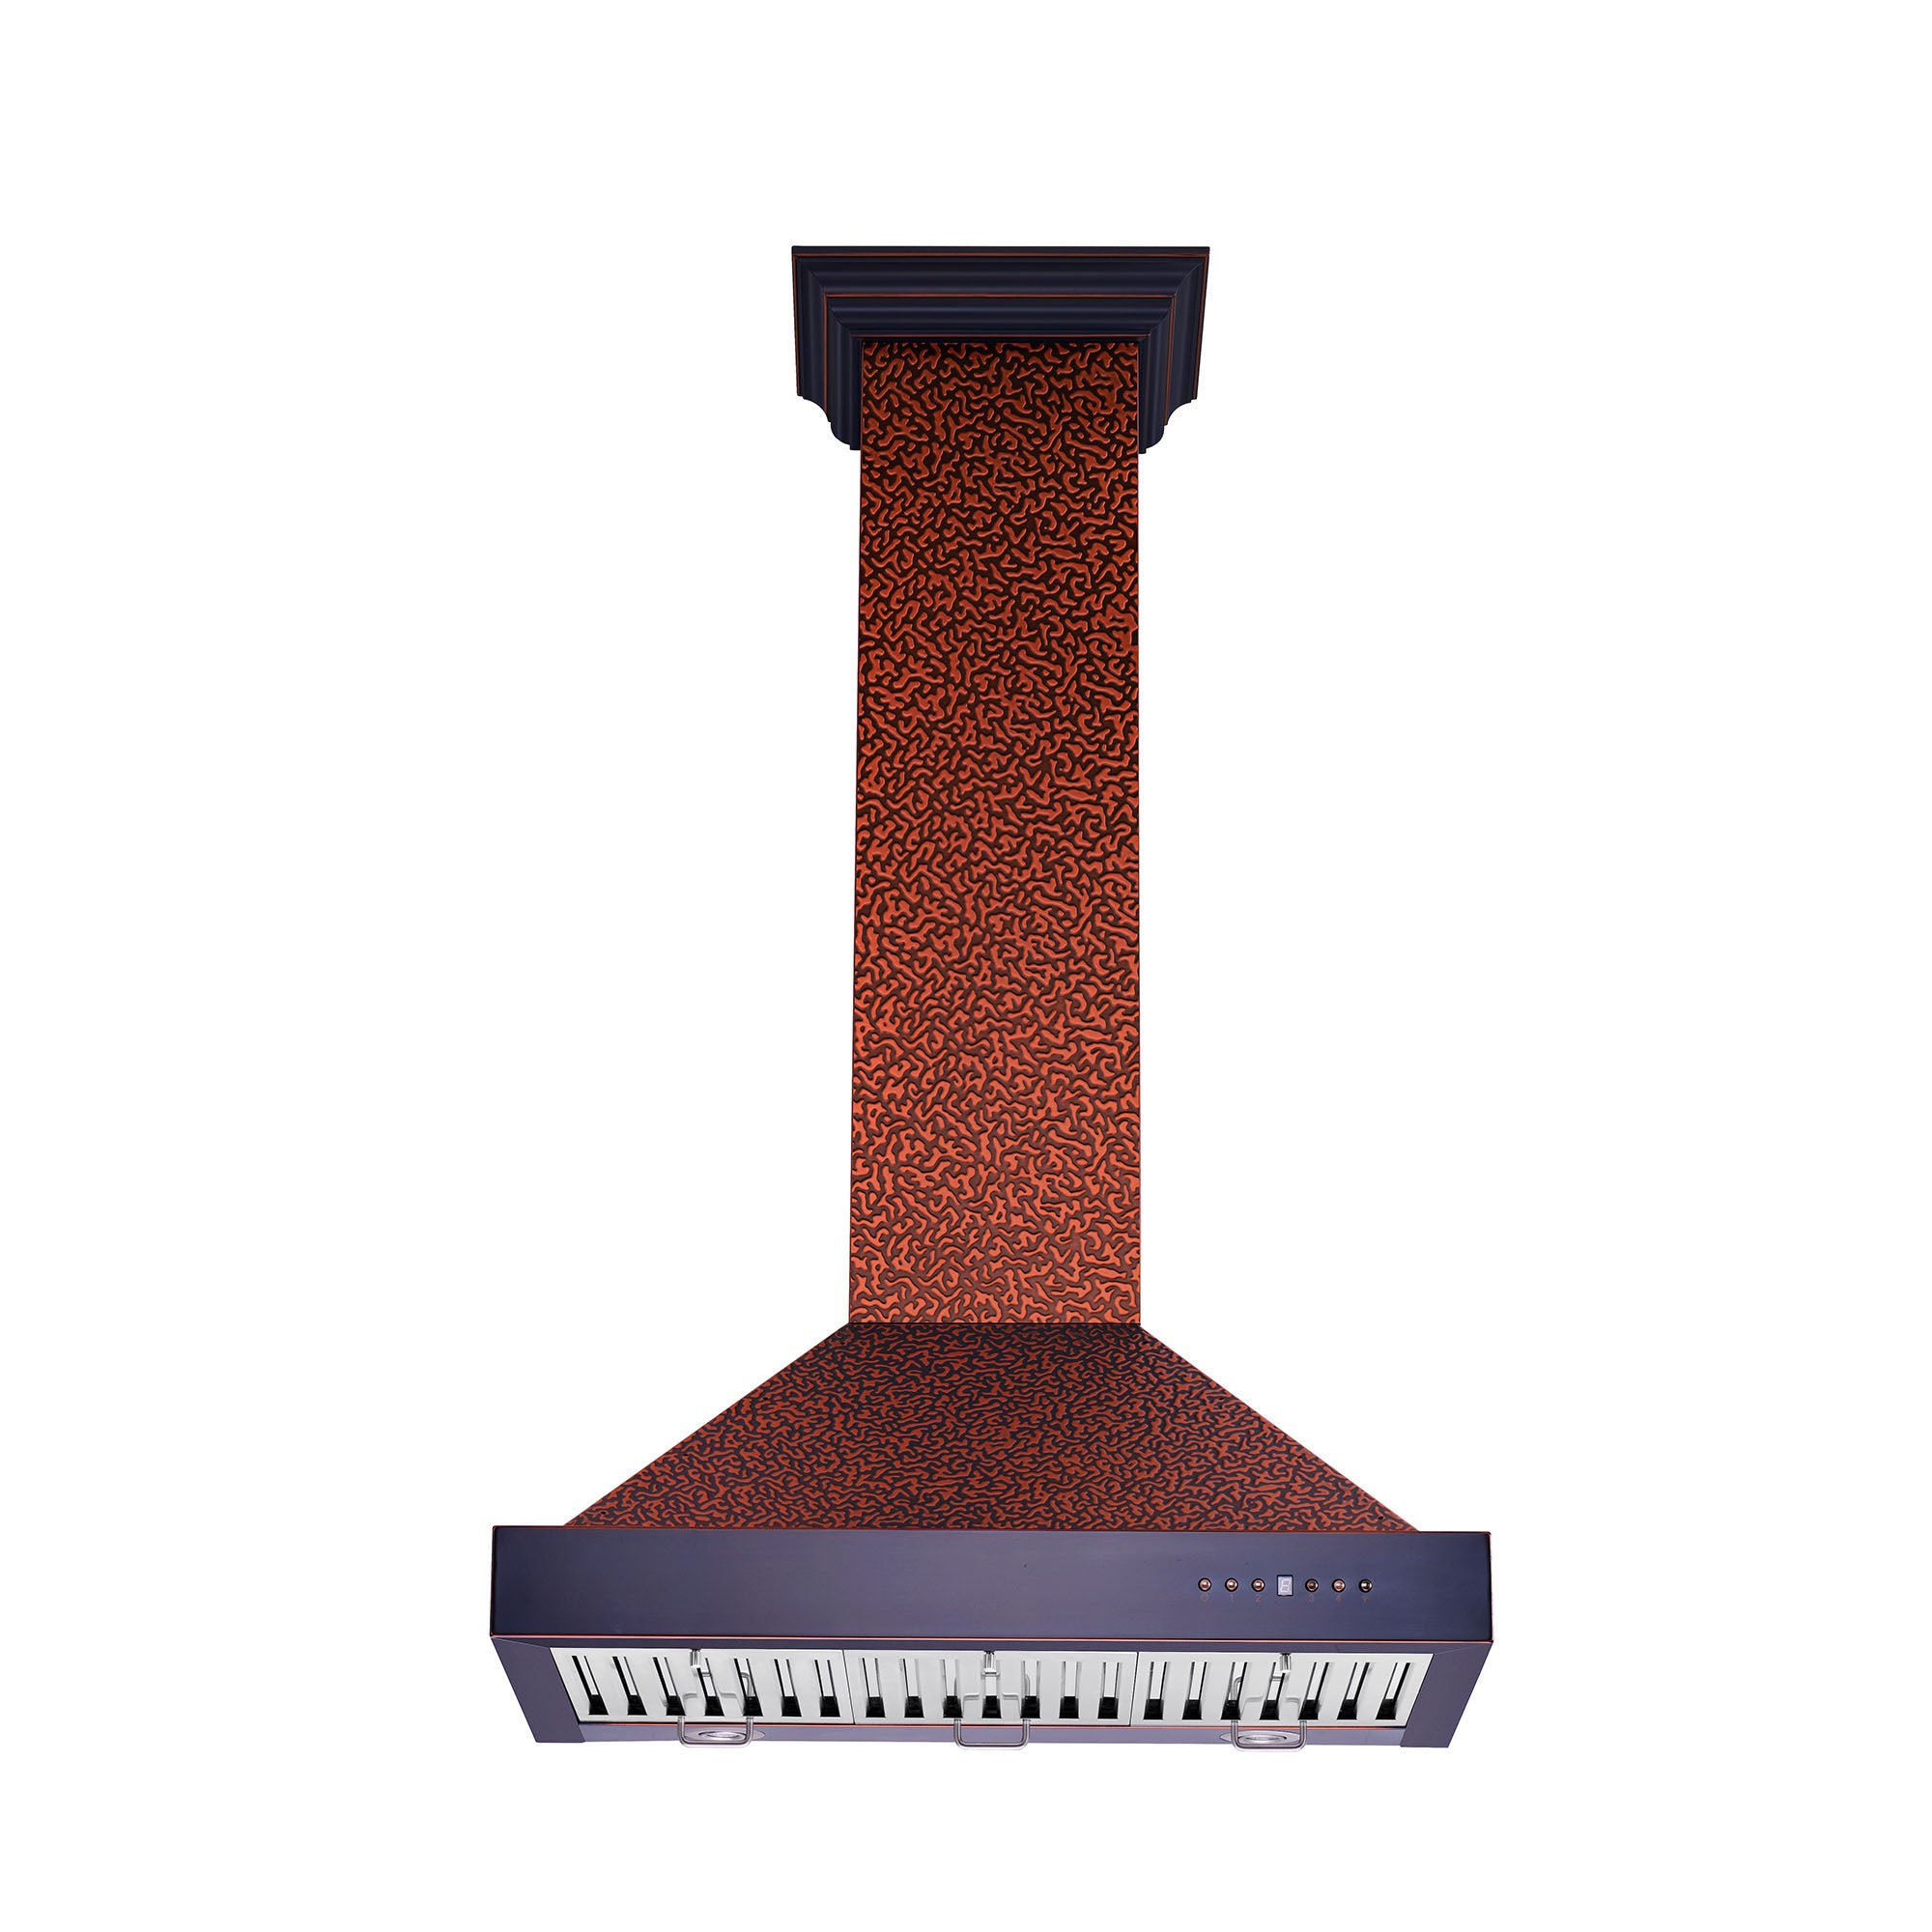 ZLINE Designer Series Wall Mount Range Hood in Embossed Copper with Size Options (KB2-EBXXX)